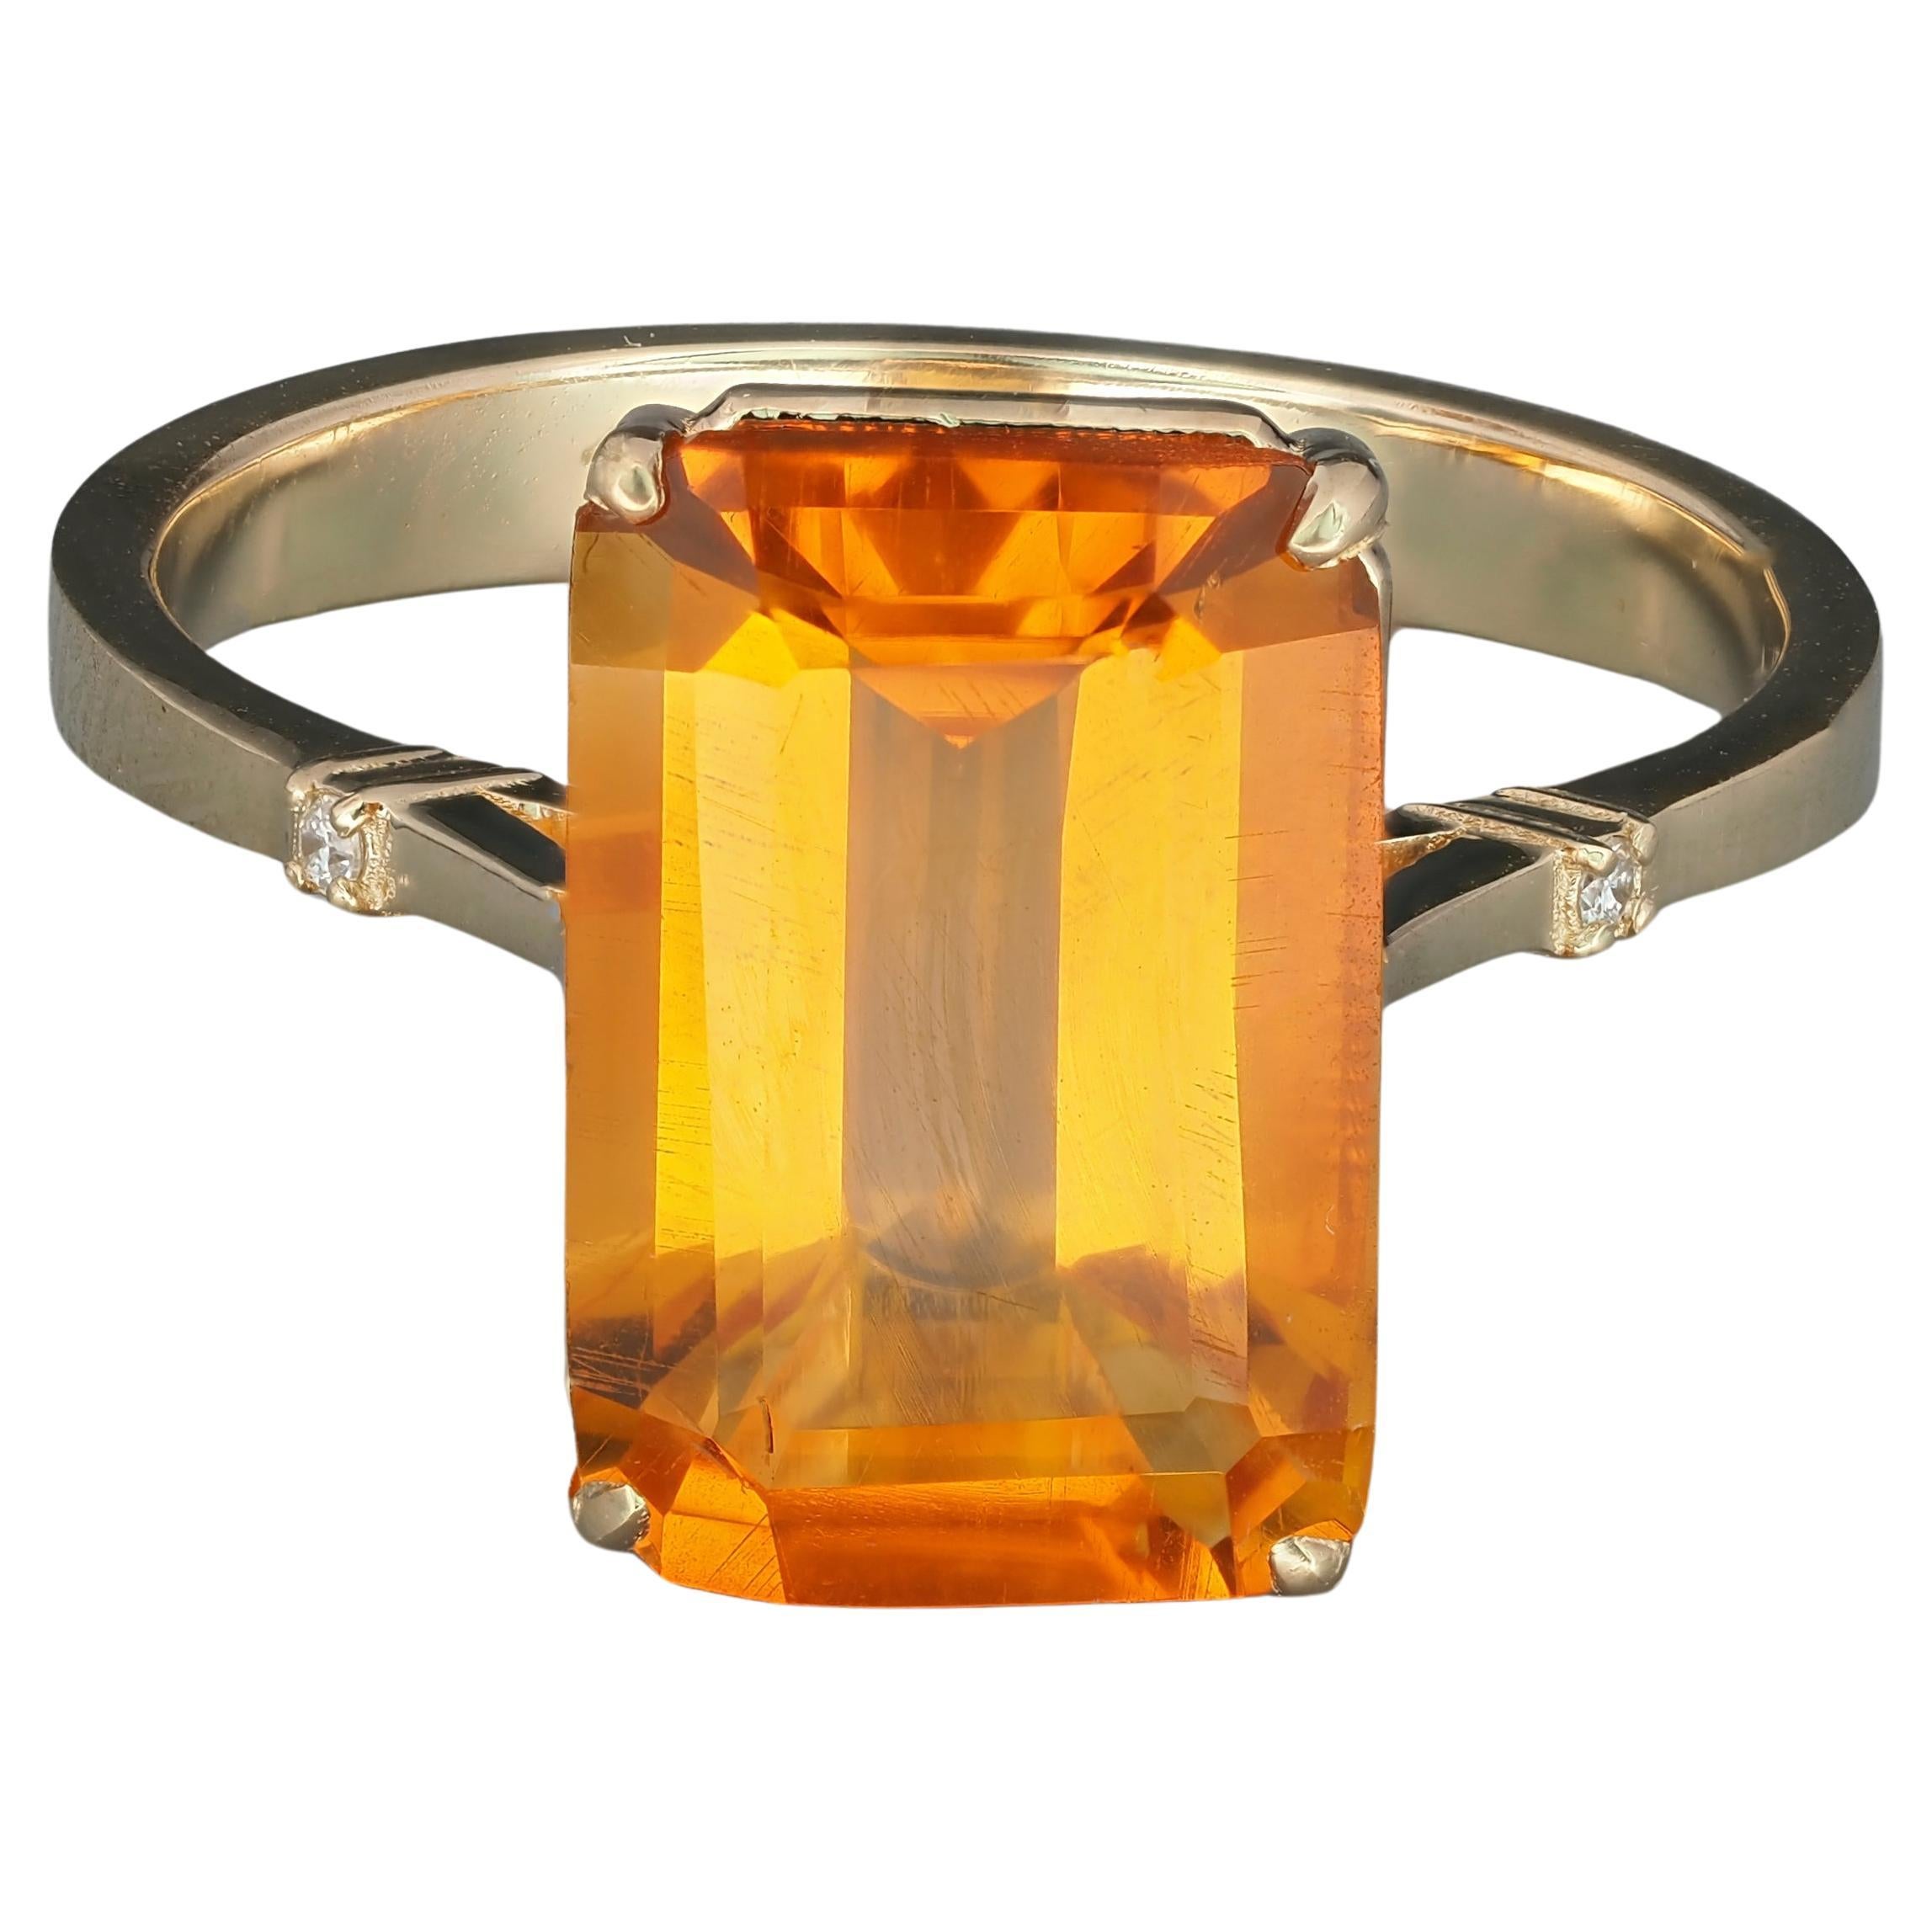 Citrine solitaire 14k gold ring. 